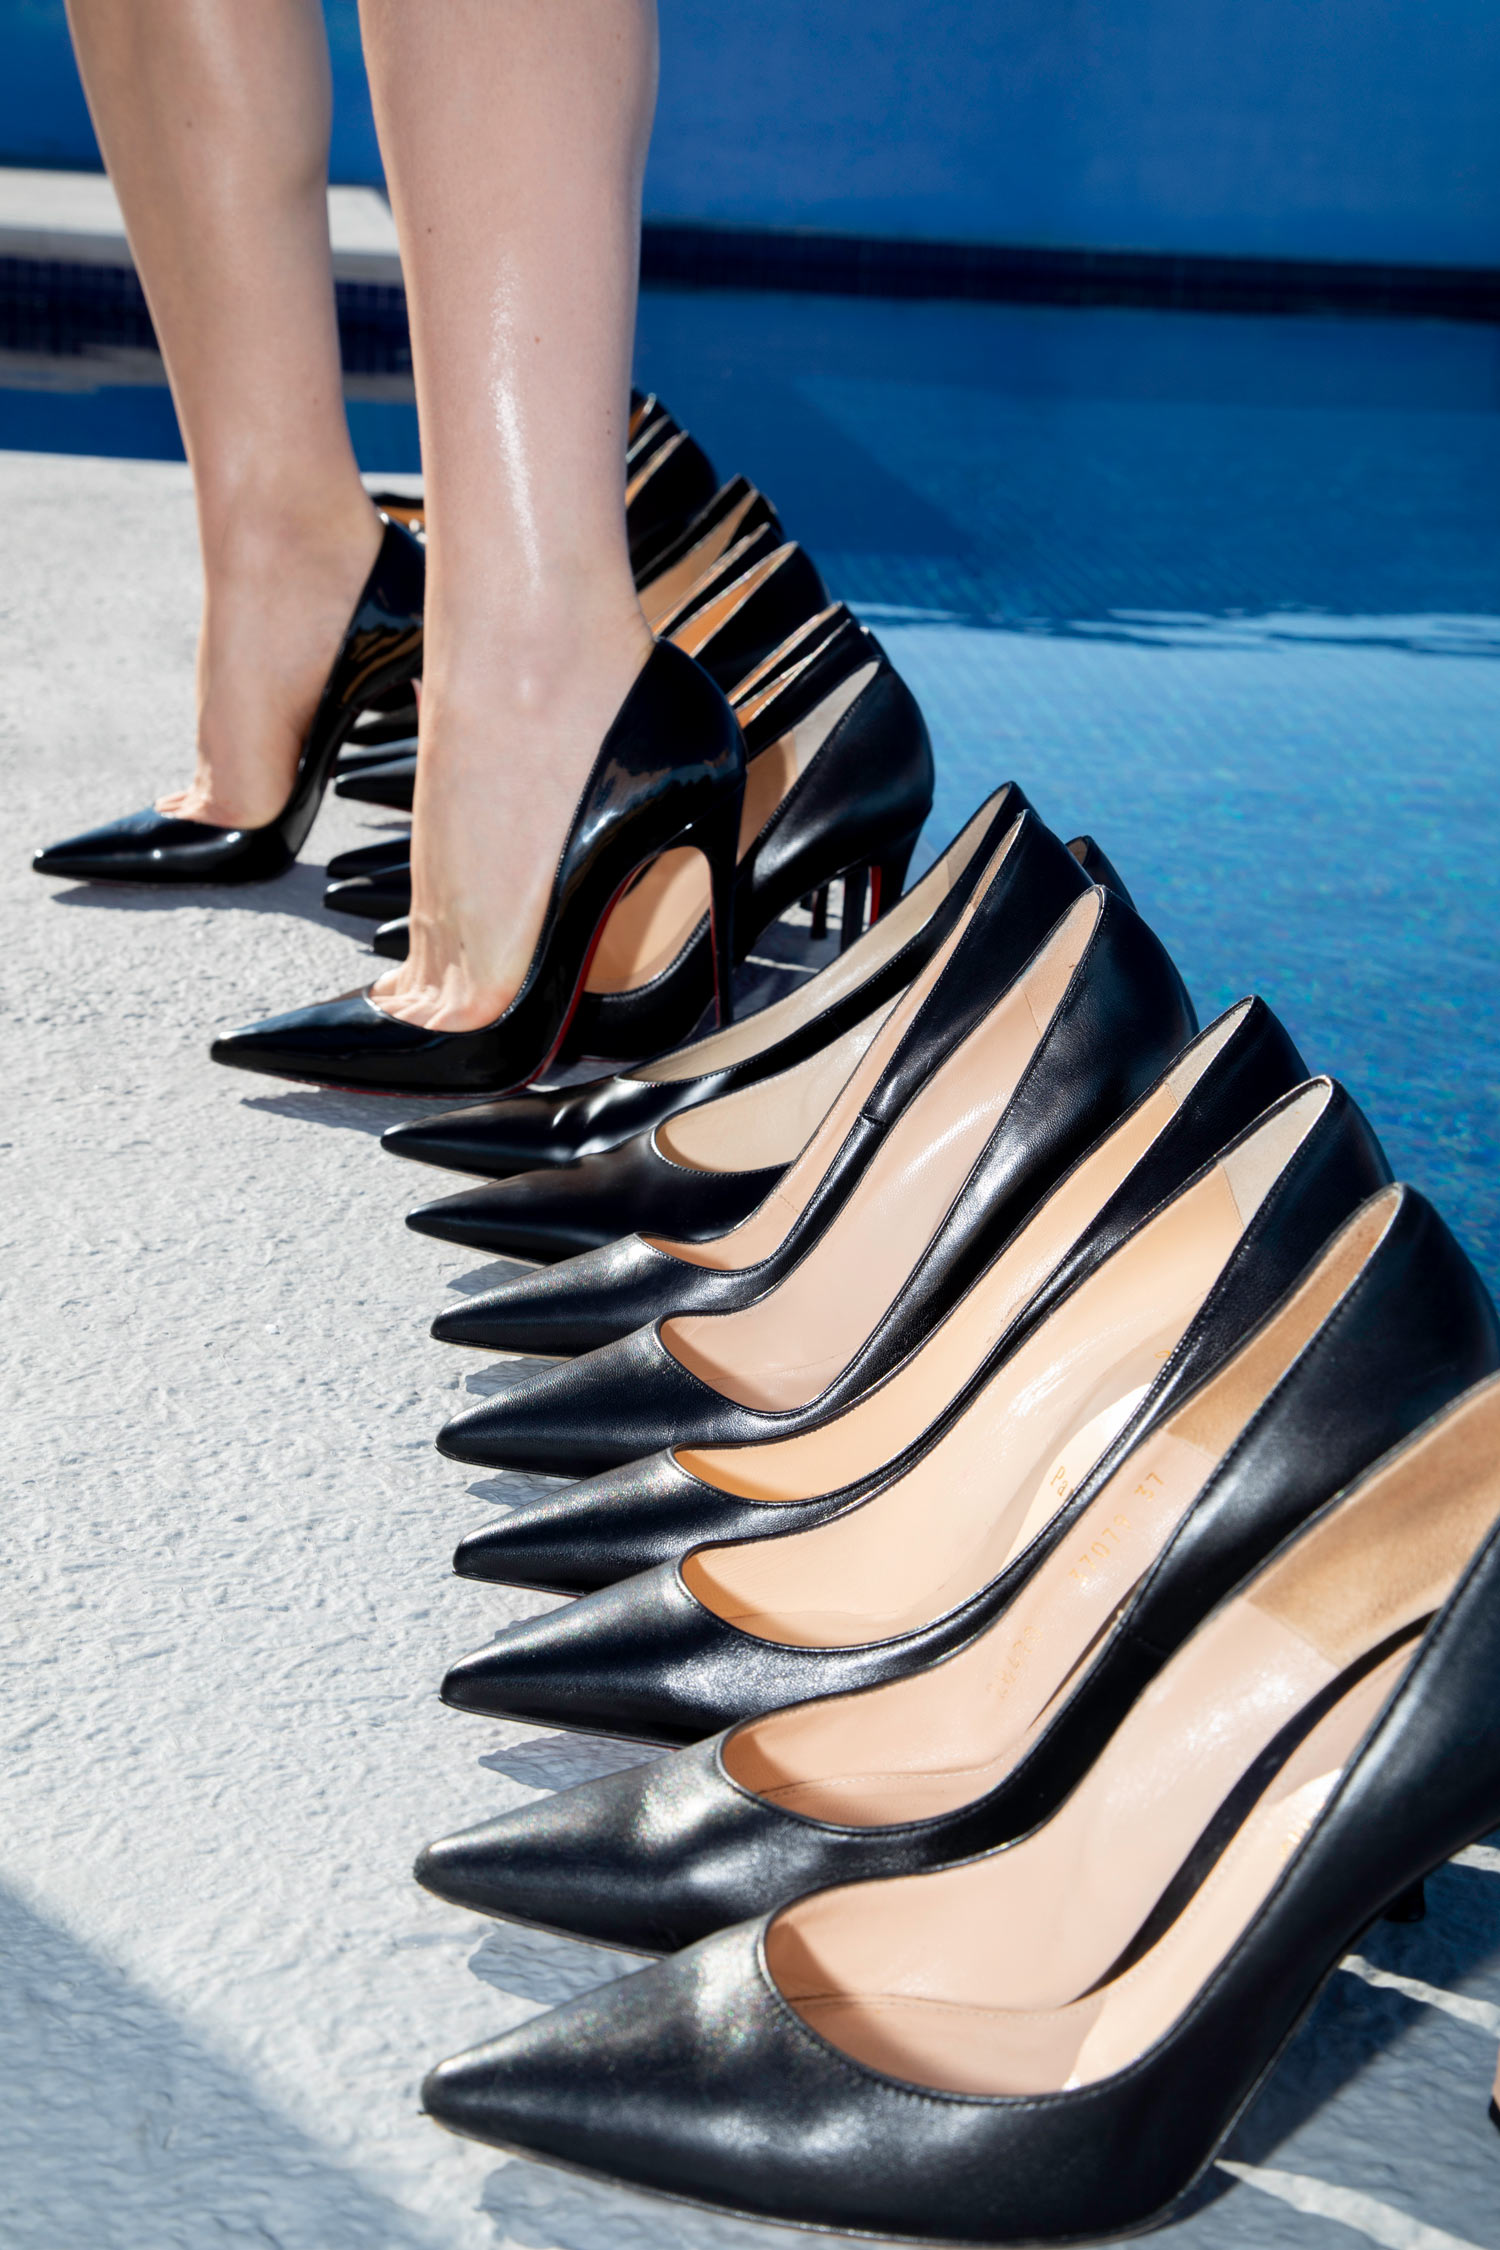 How To Find The Perfect Black Pumps - 5 